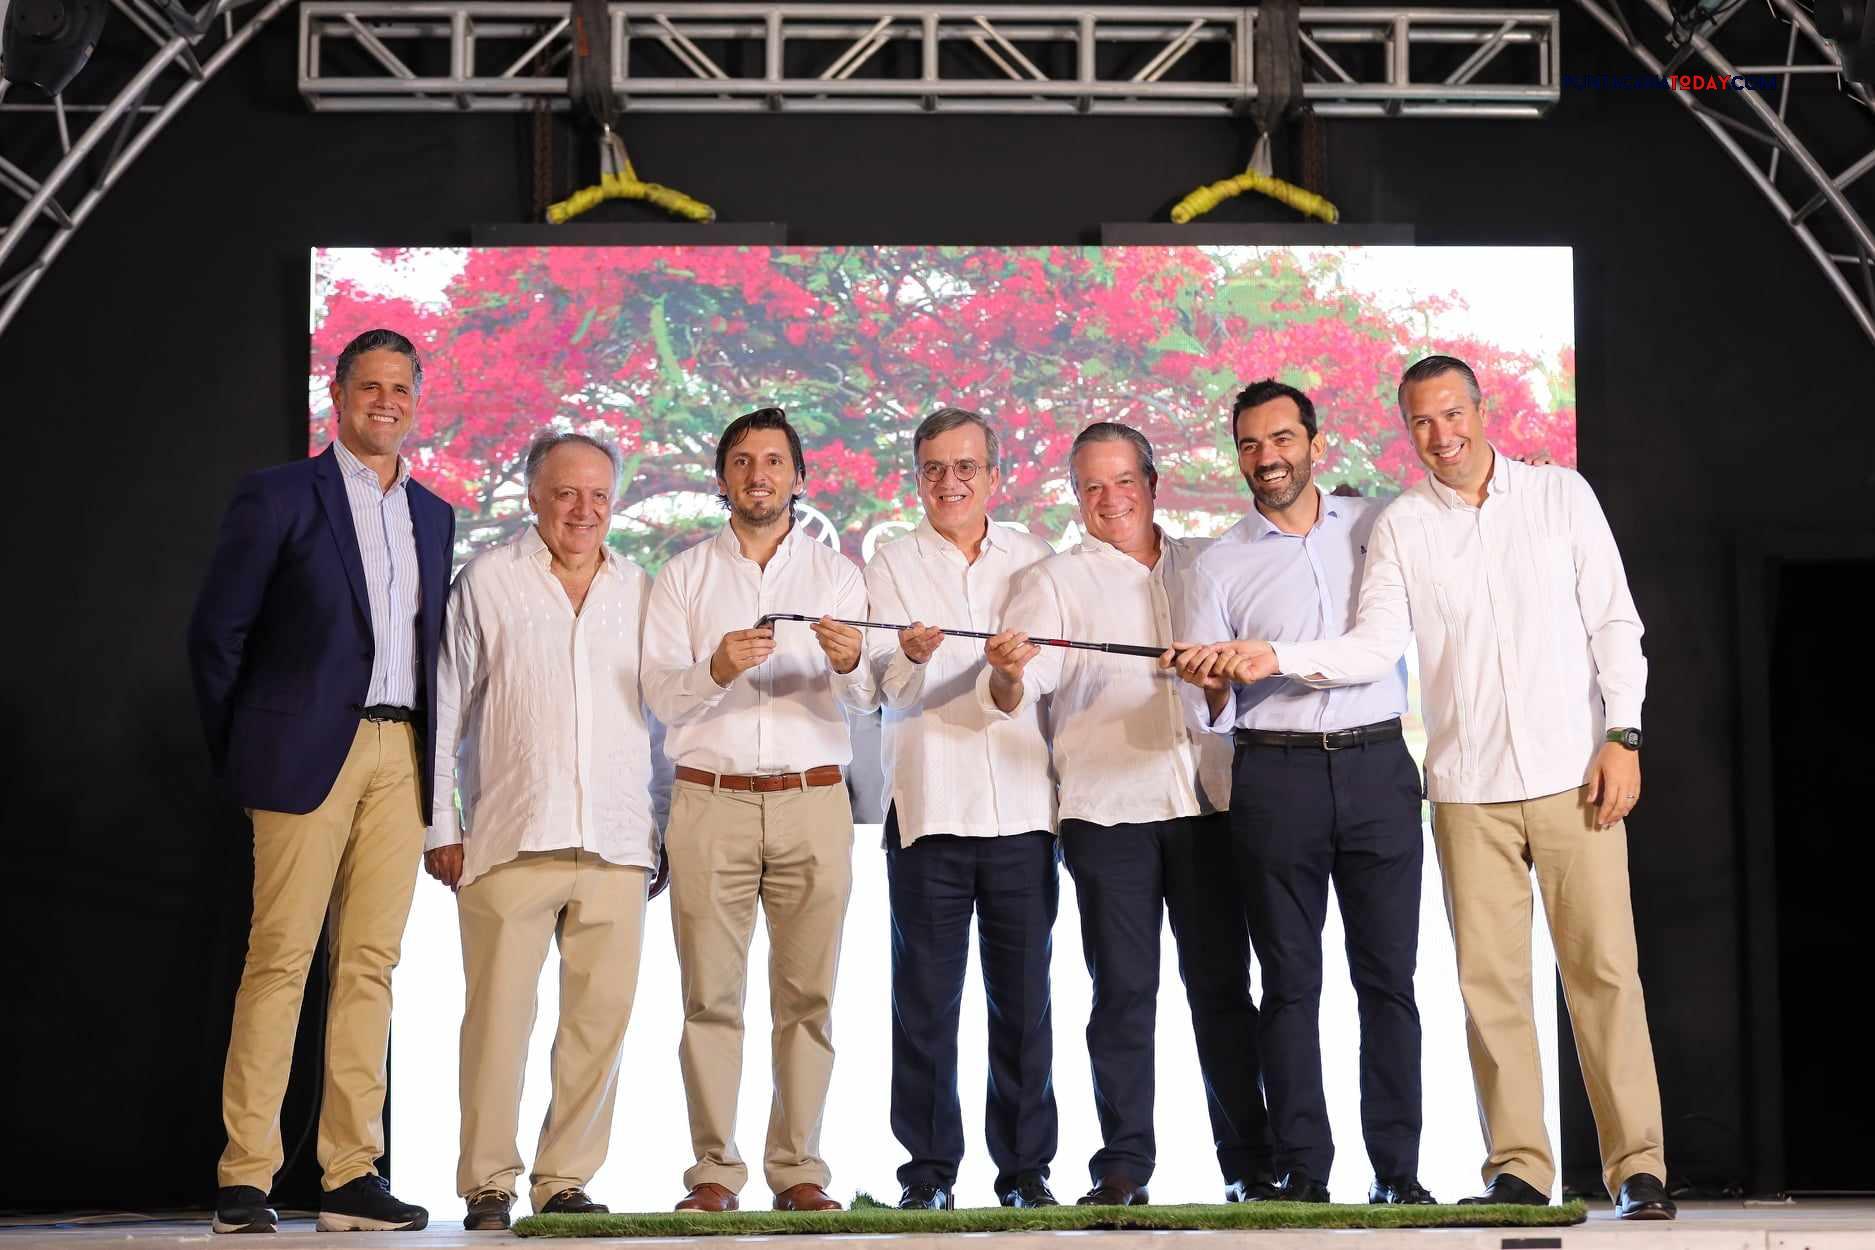 The Coral Golf Resort project in Punta Cana is developed by the Gesproin Group